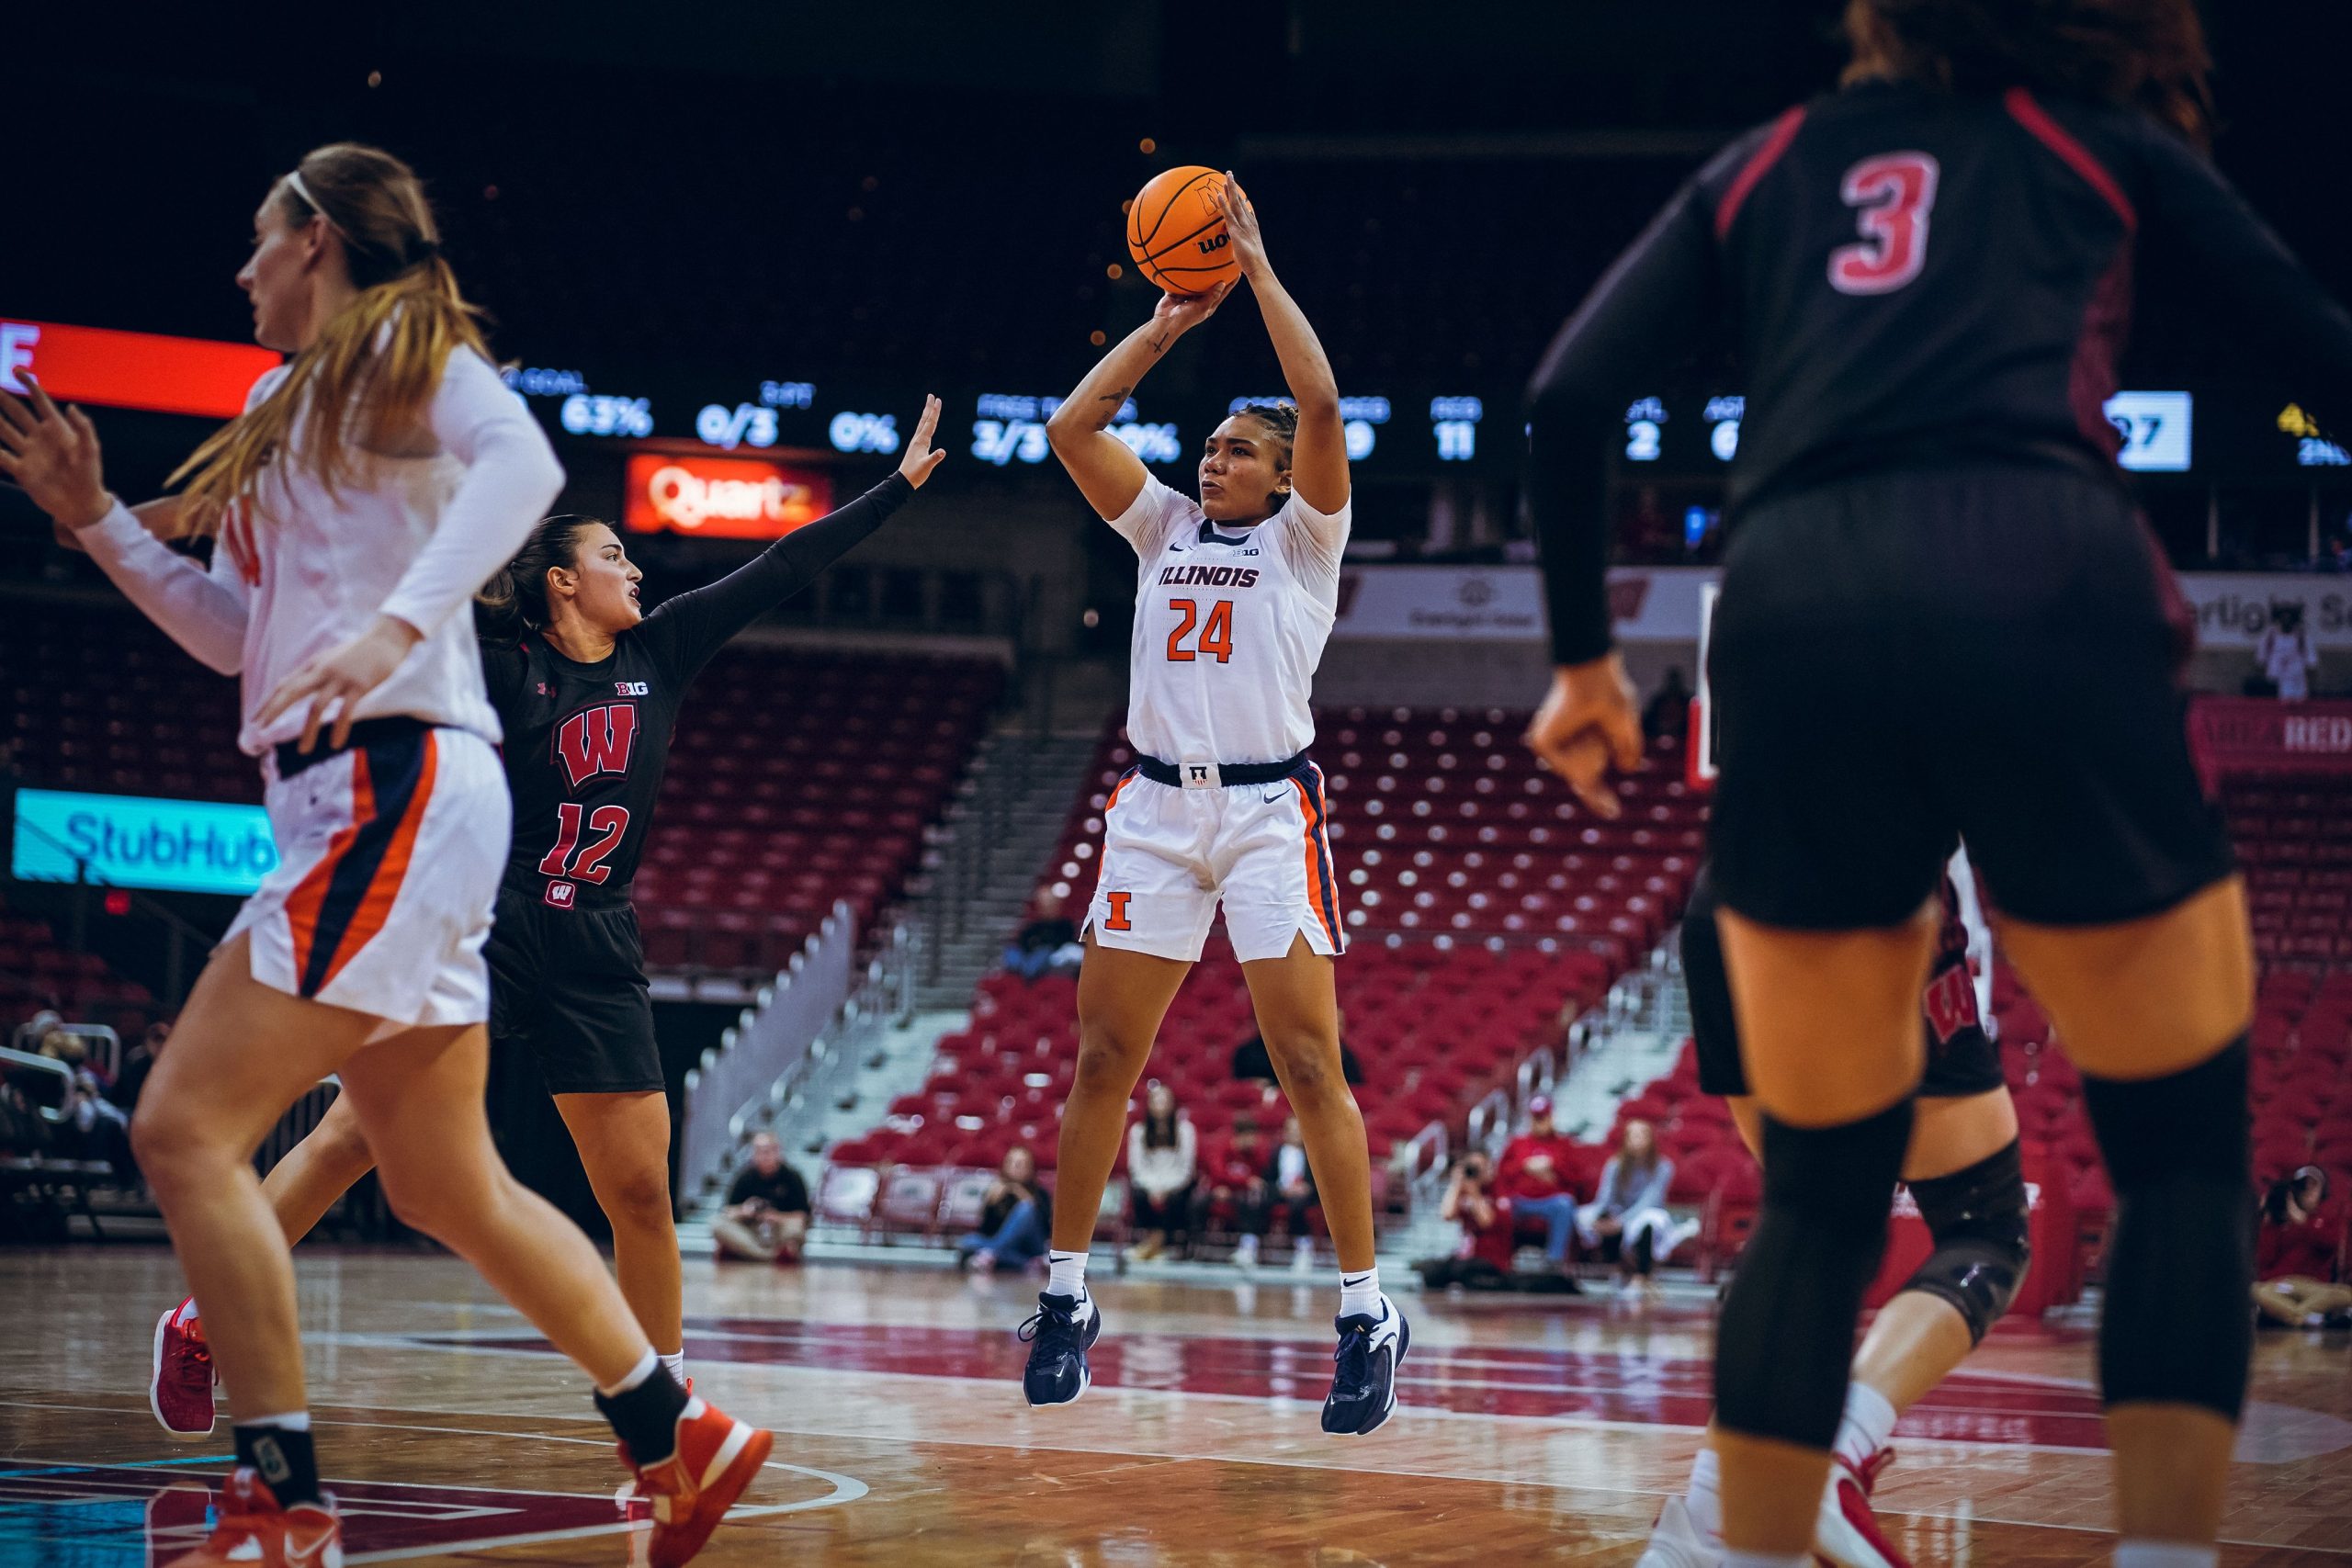 McKenzie's Career-High Keeps Illini Women Red-Hot With 79-63 Win Over Badgers